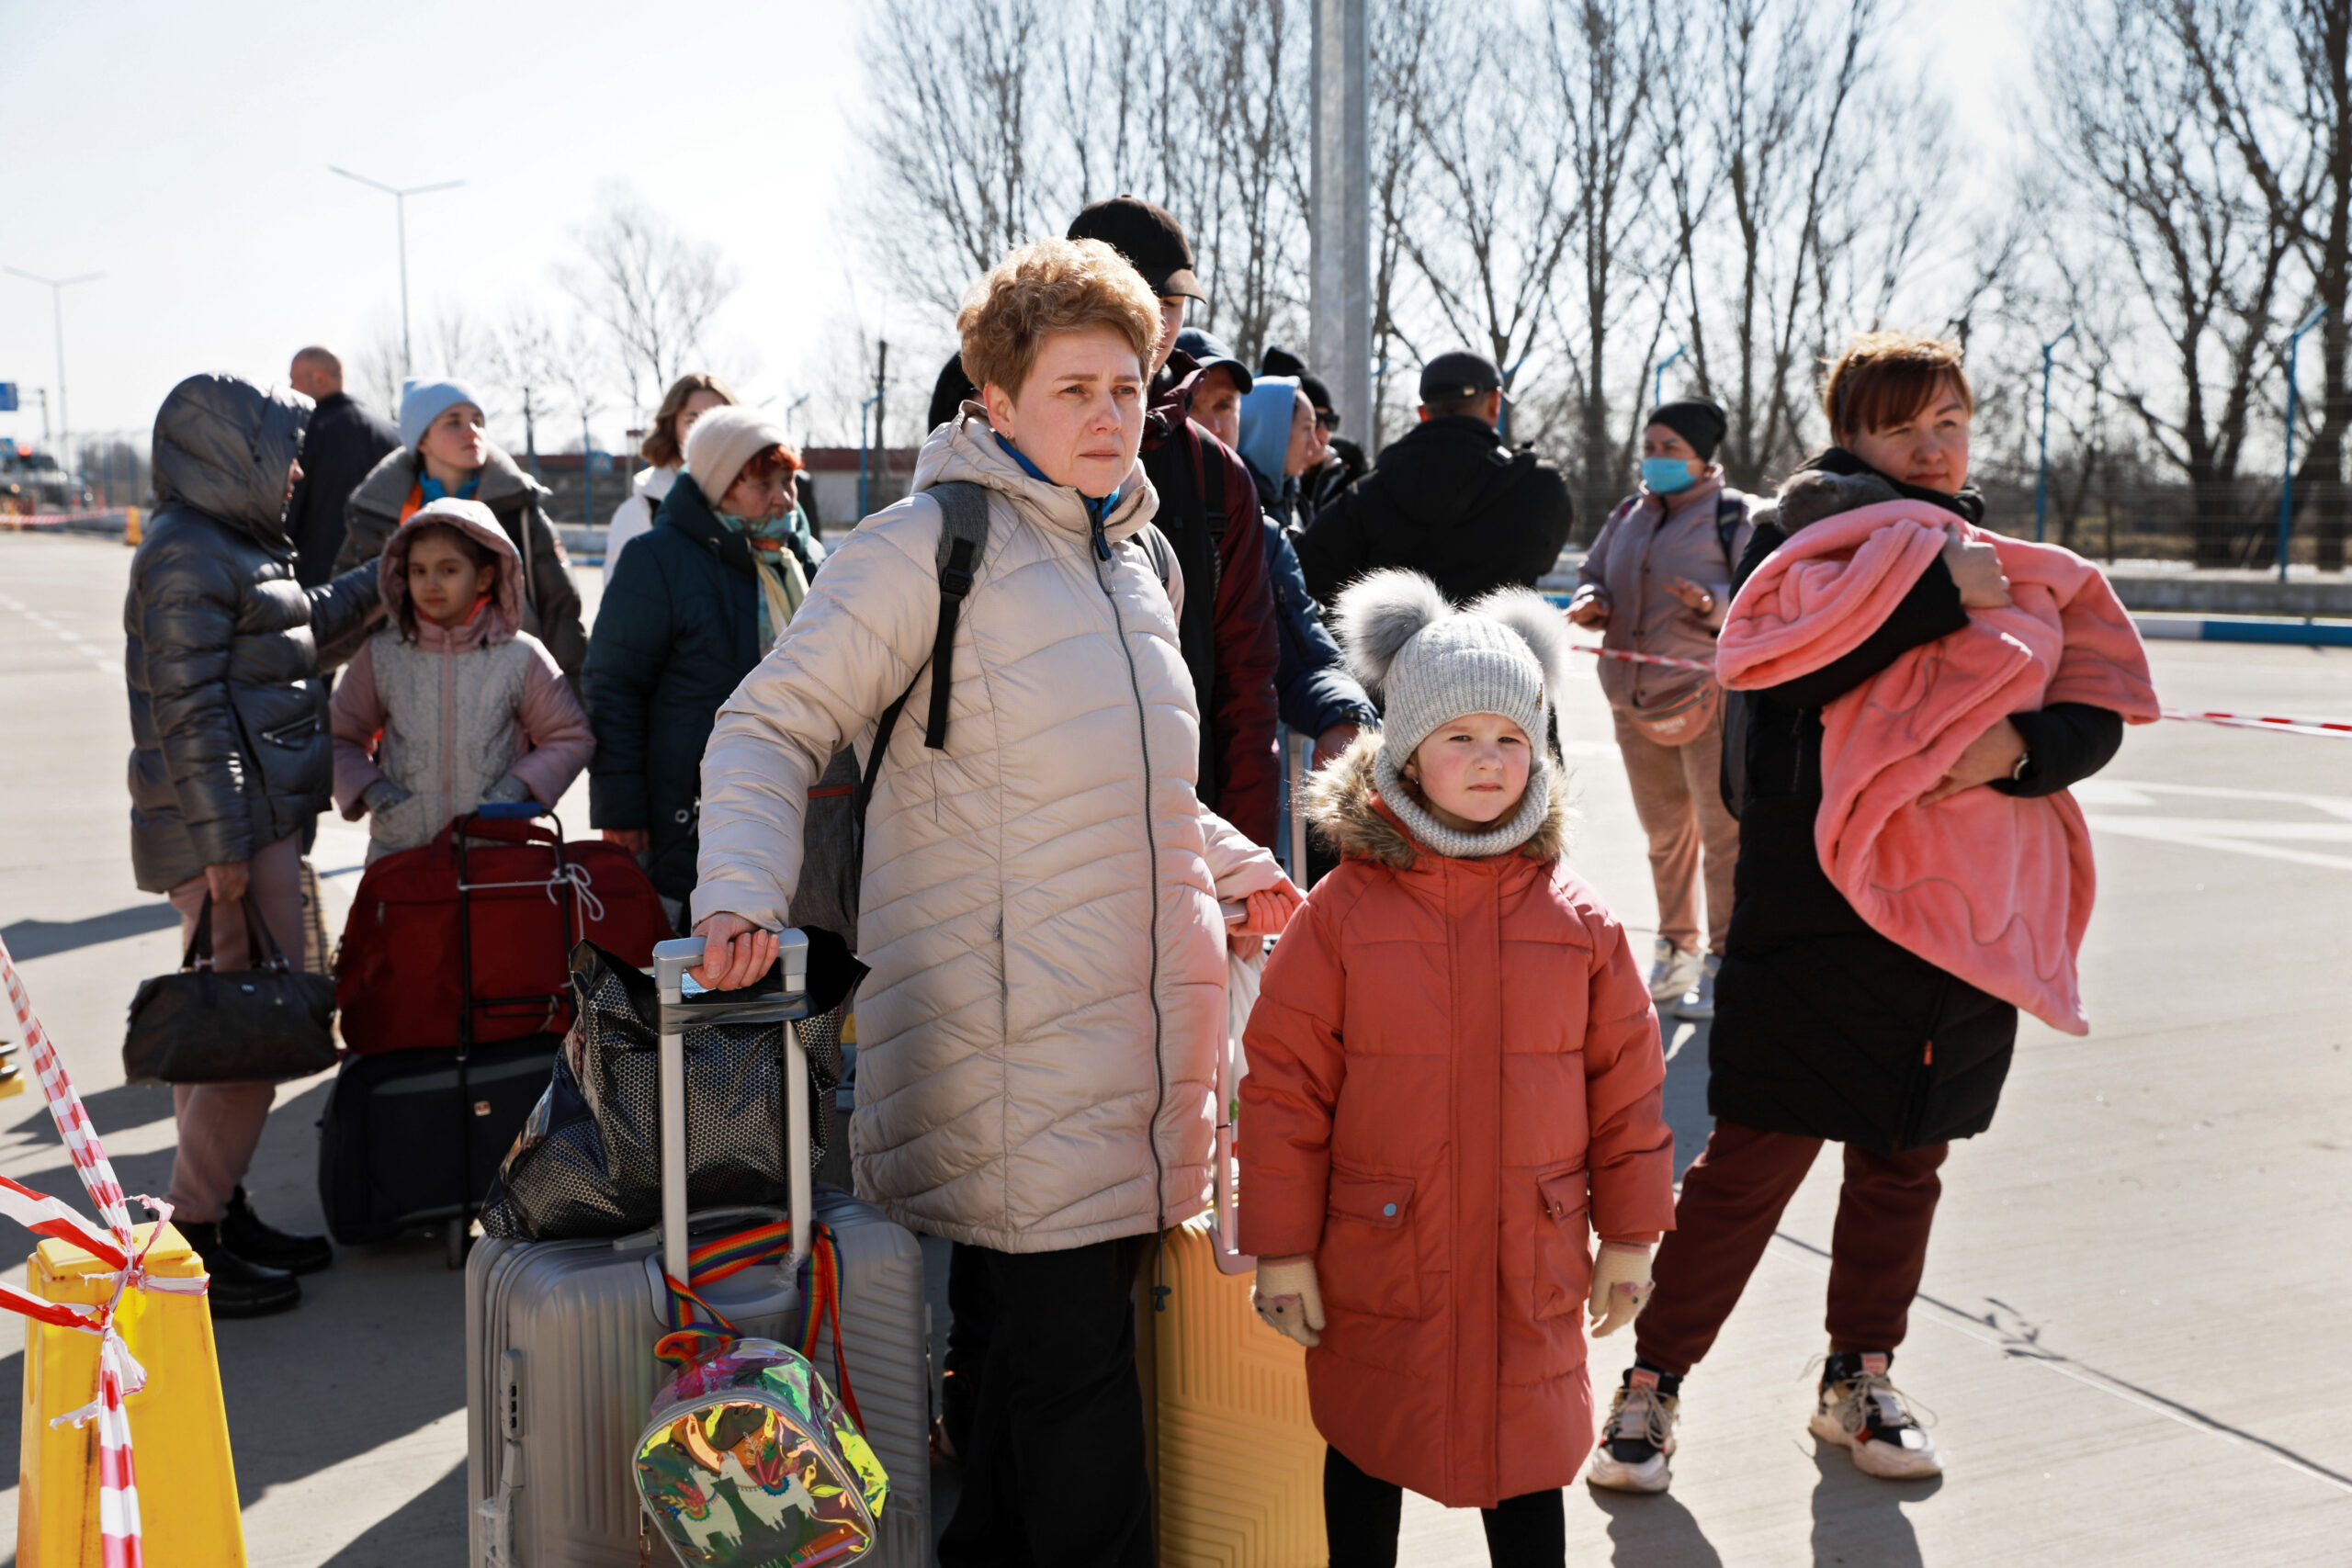 The photo is of Ukrainian people fleeing from their country. In the centre of the photo is a women with her arm around a small child. They are holding multiple bags of luggage and are surrounded by others with more luggage.